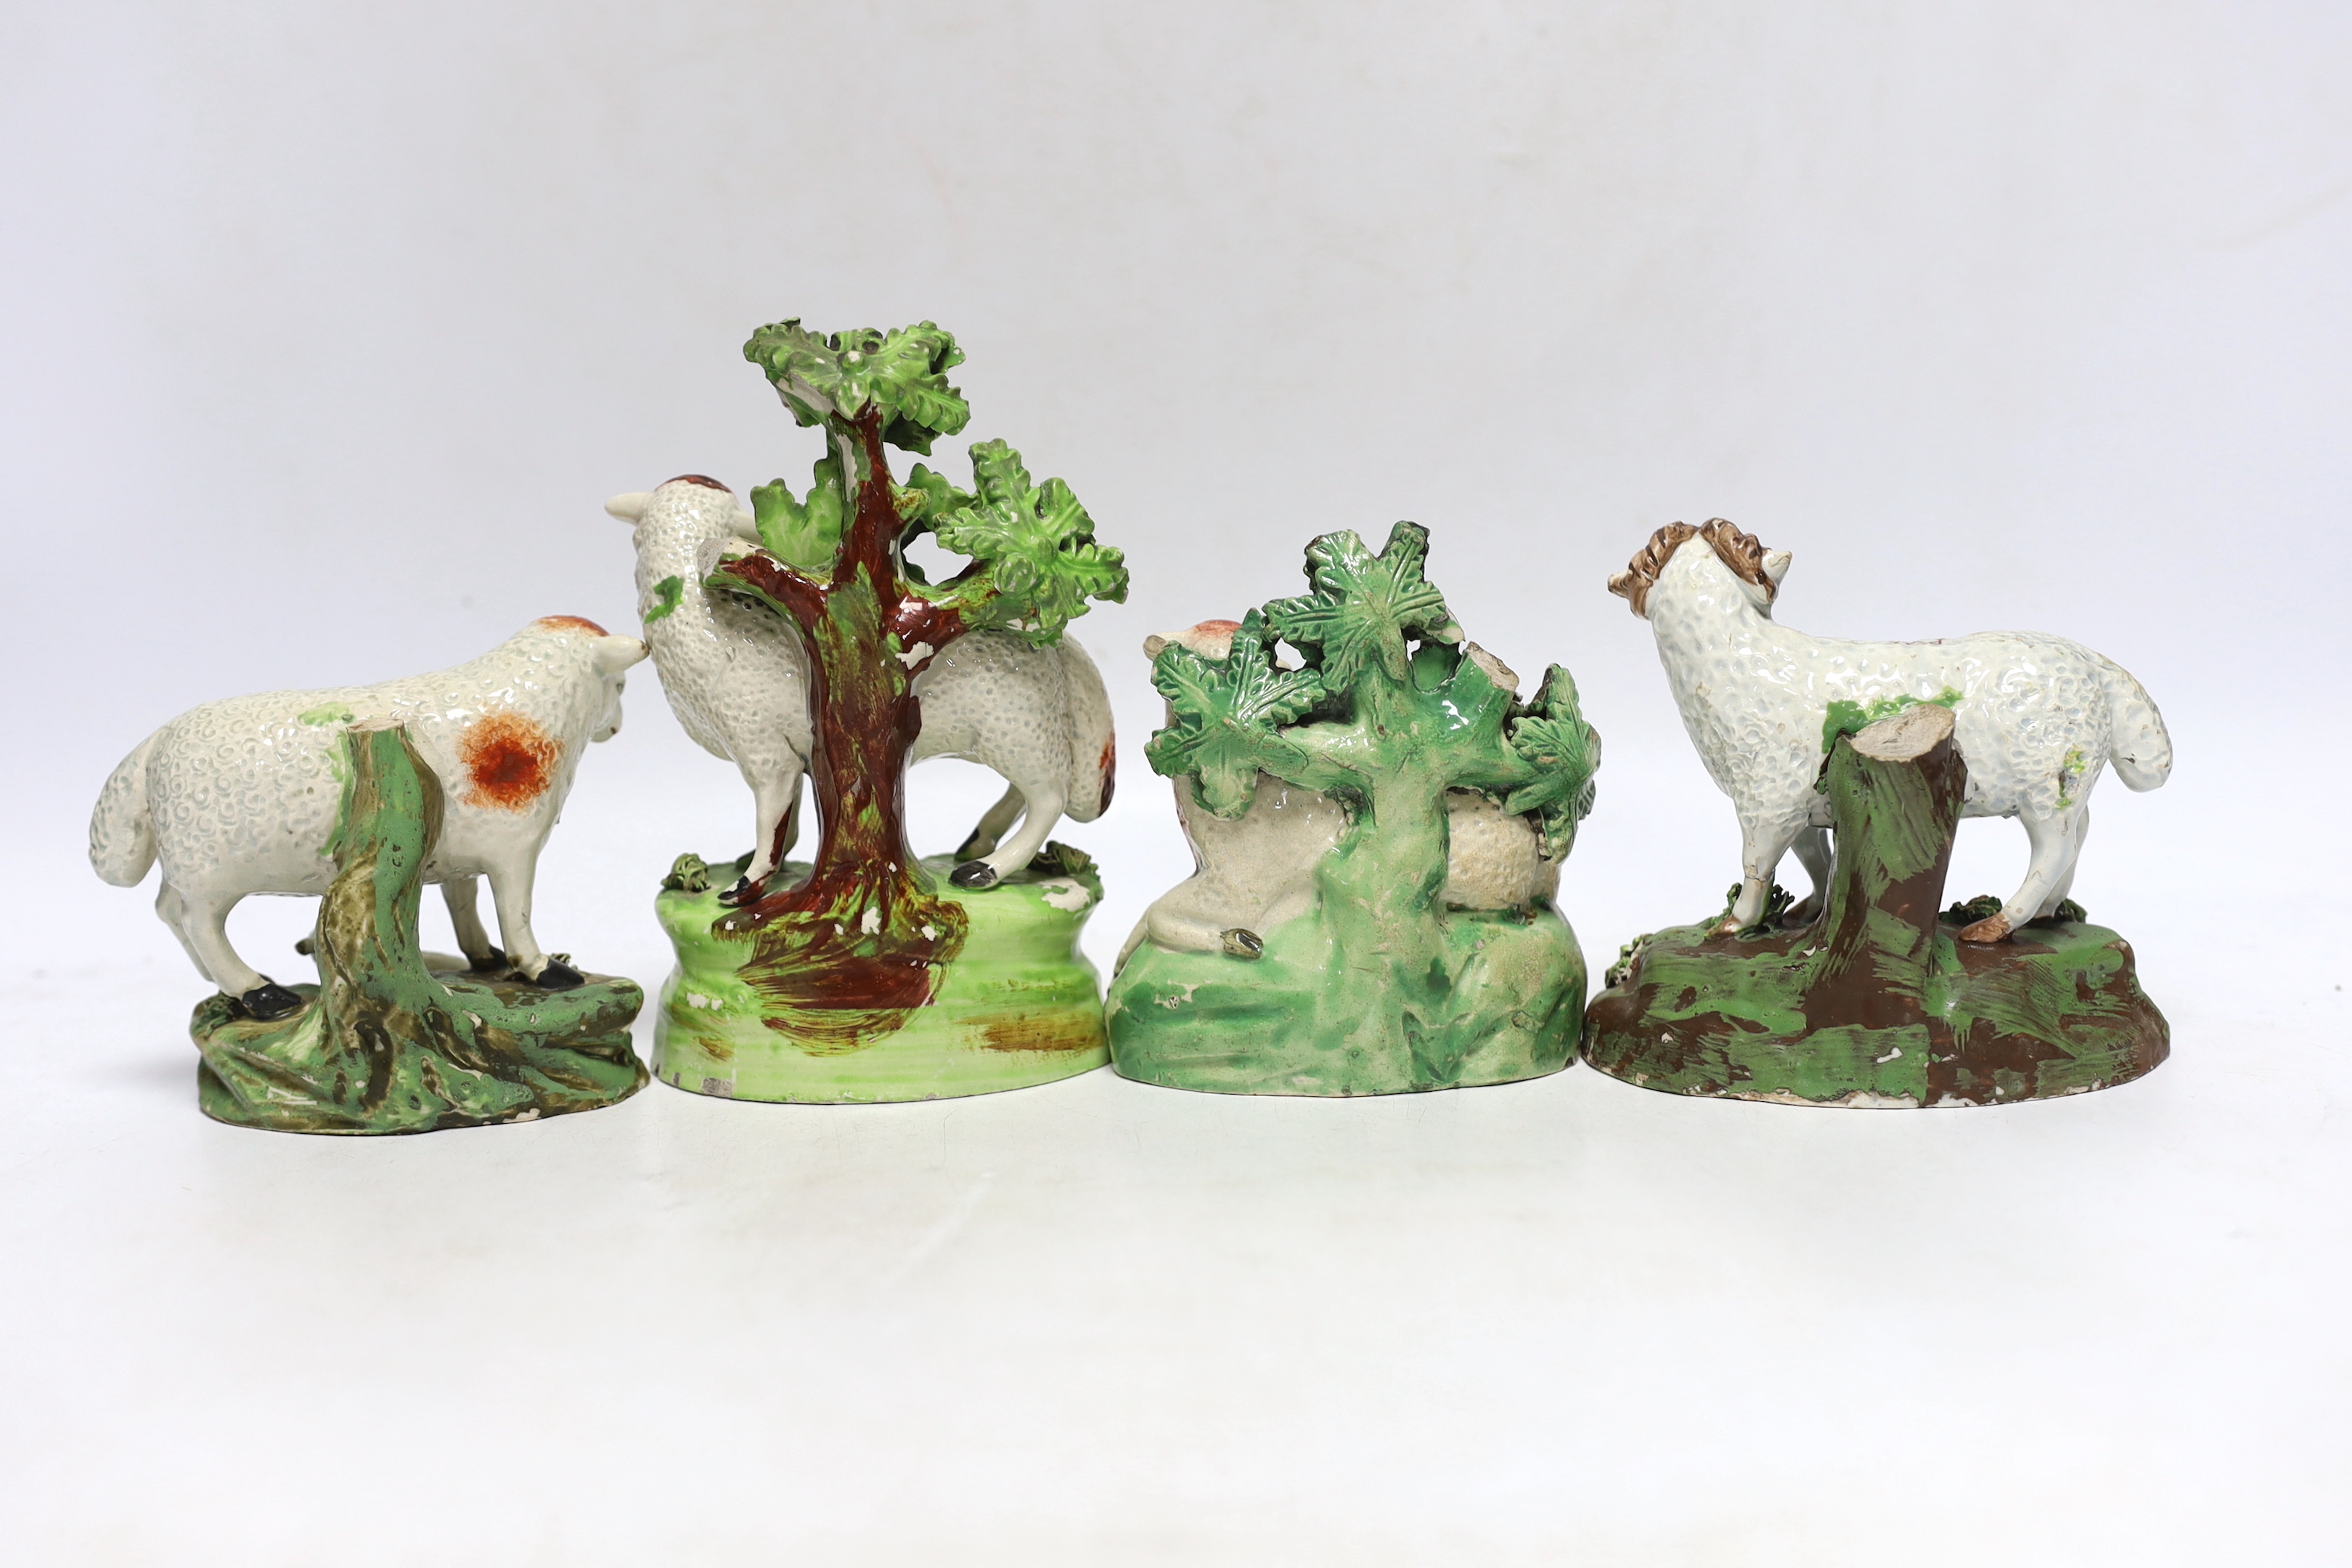 Four Staffordshire pearlware figures of sheep, c.1820-30, one with rare initials ‘PW’ to its back, largest 15cm high